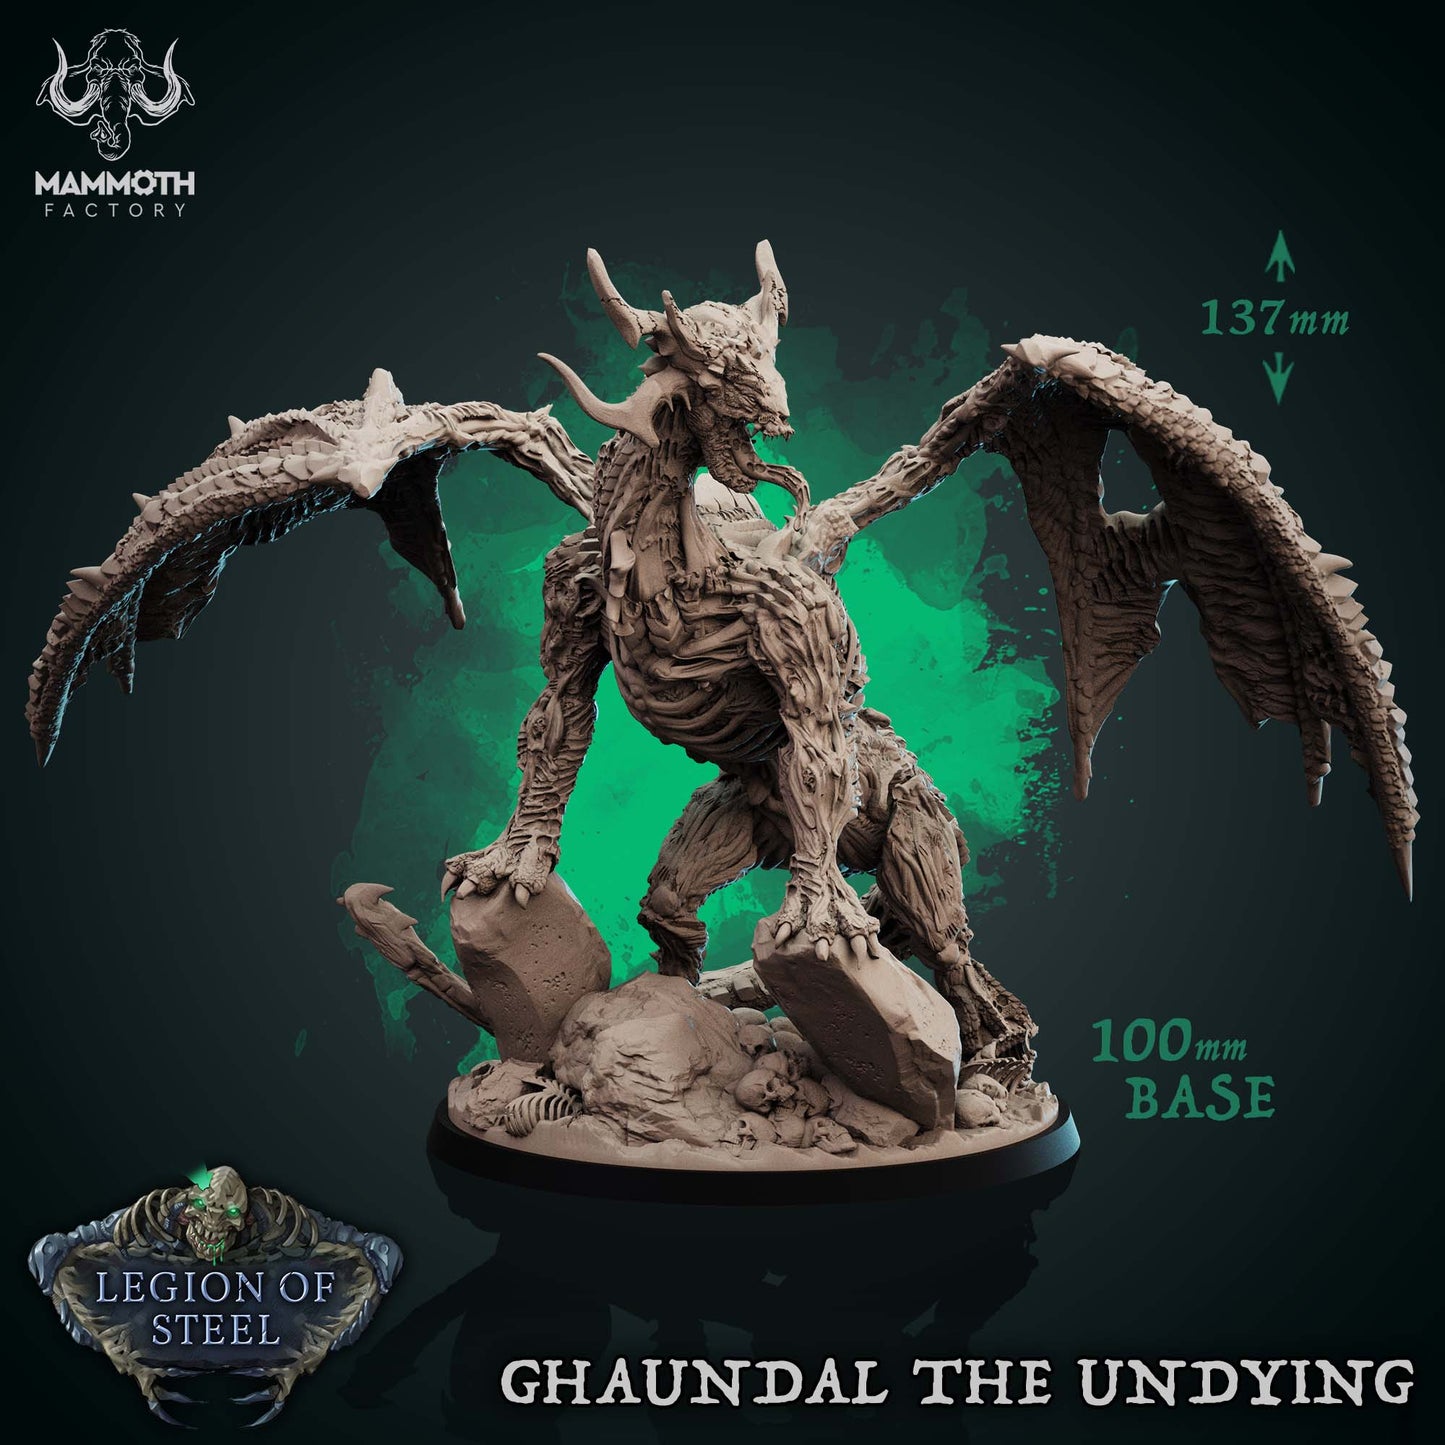 Ghaundal the Undying - Untote Drache Boss Miniatur | Dungeons and Dragons | Tabletop | Pathfinder | D&D | Mammoth Factory